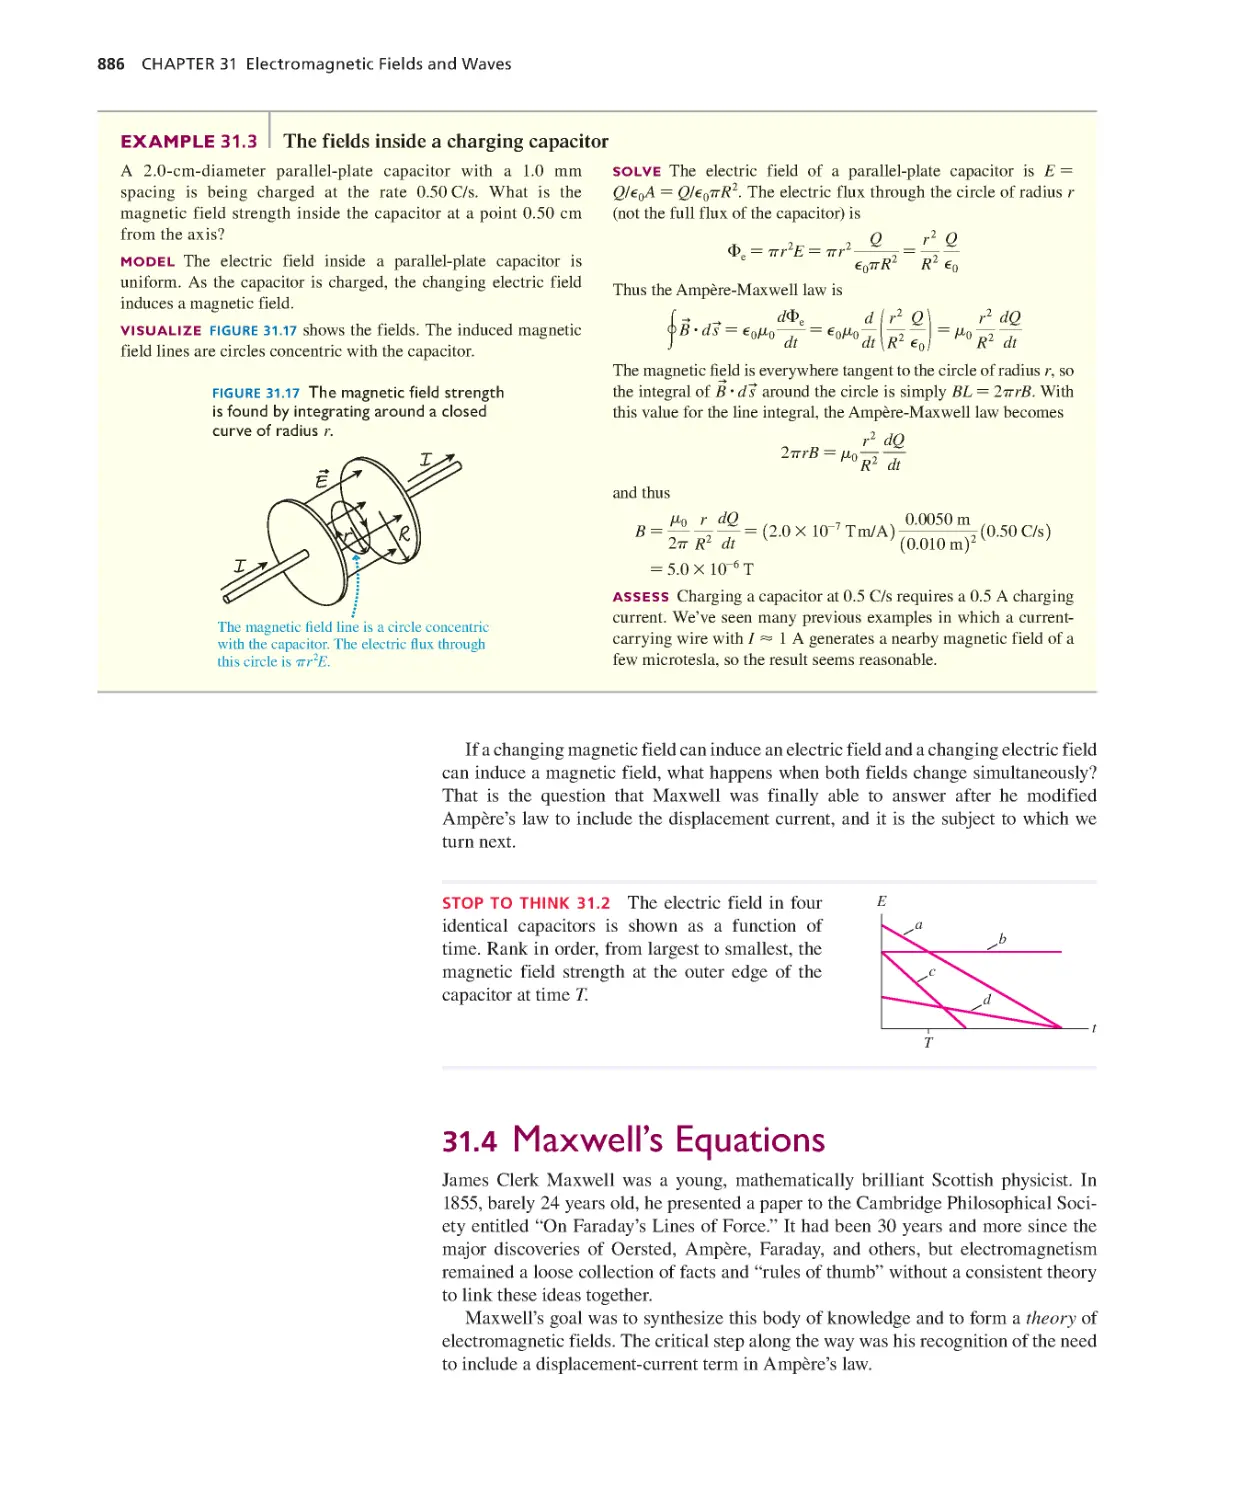 31.4. Maxwell’s Equations